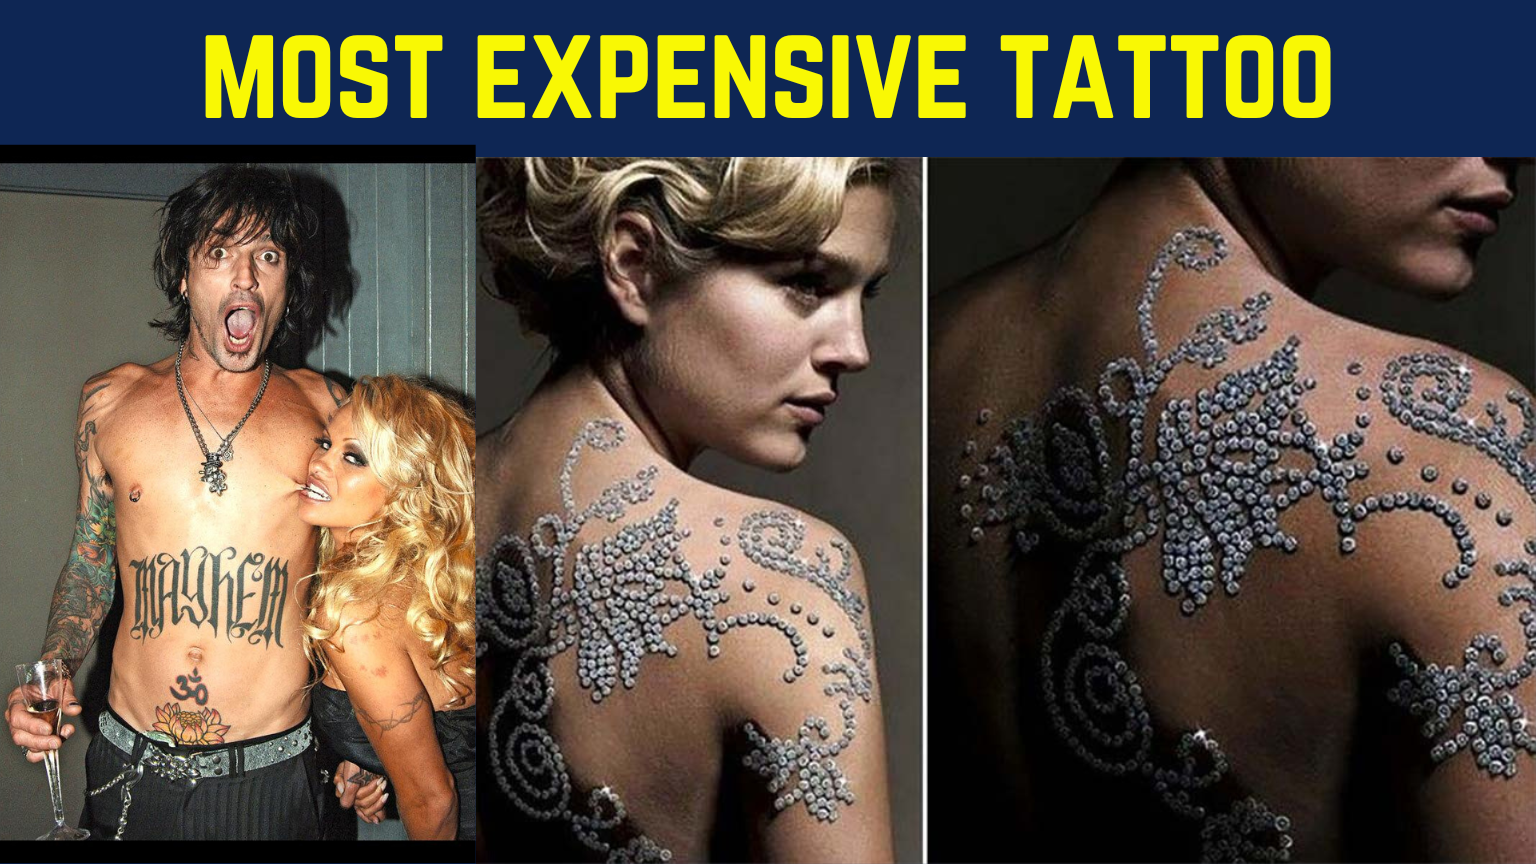 tattoo facts united states